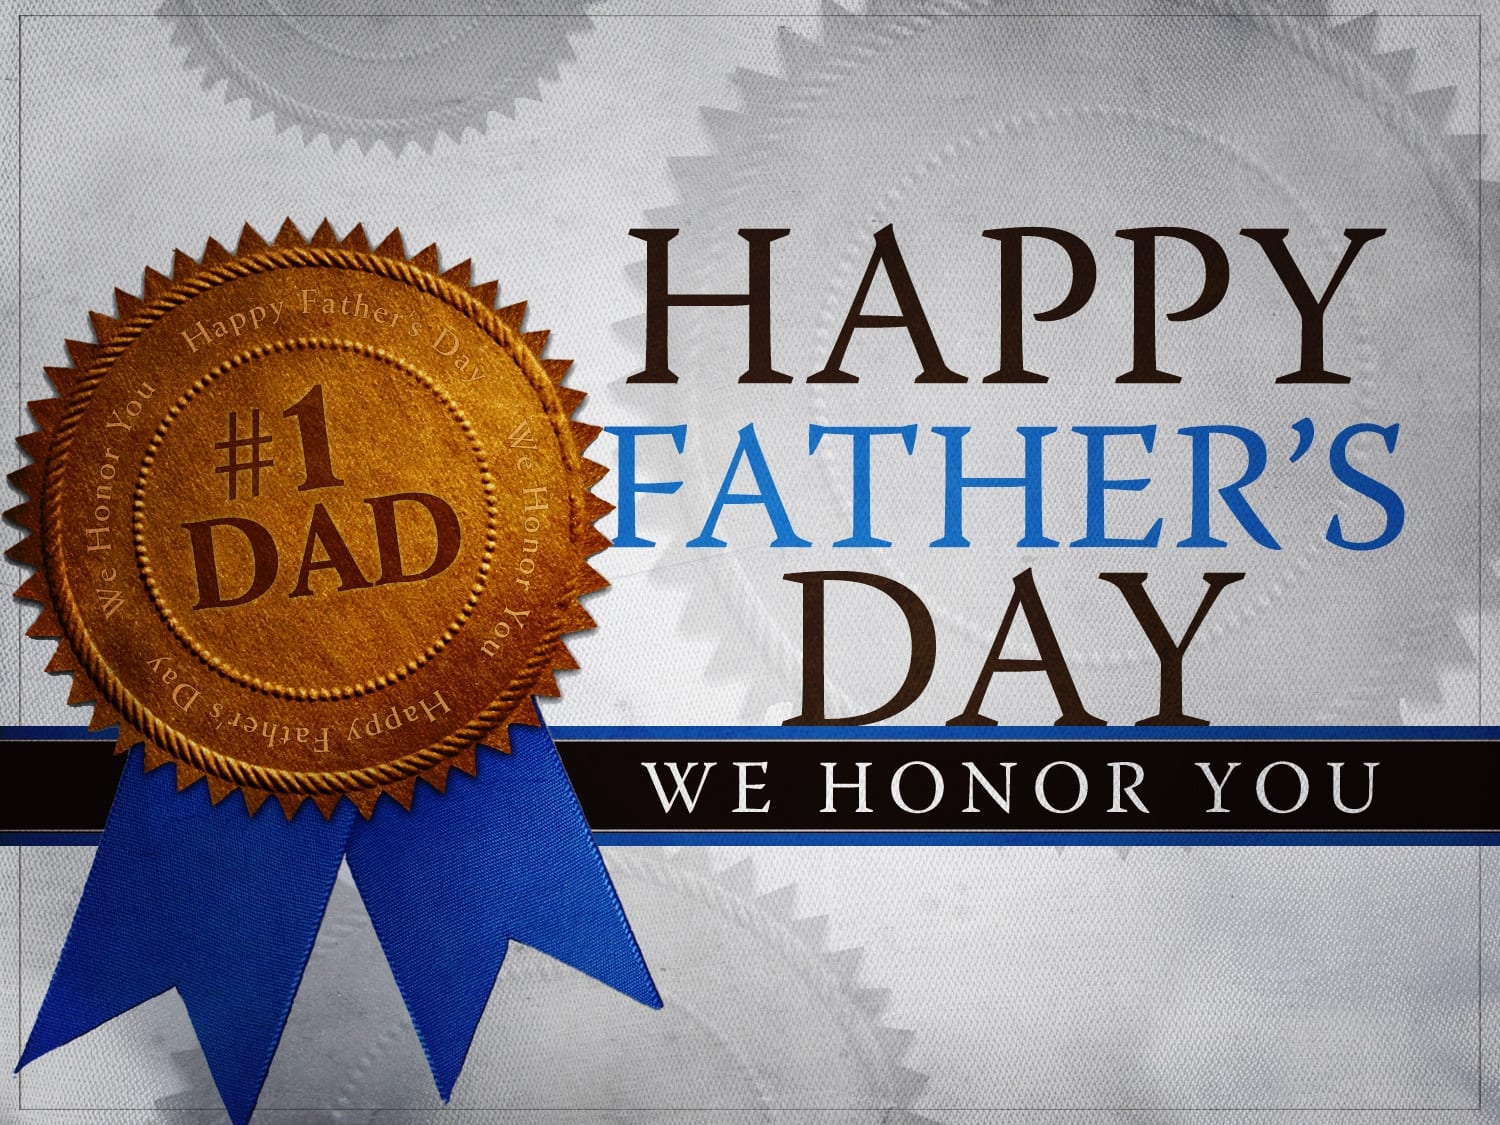 Happy Fathers Day Messages, Wishes, SMS and Images for Cool Dads